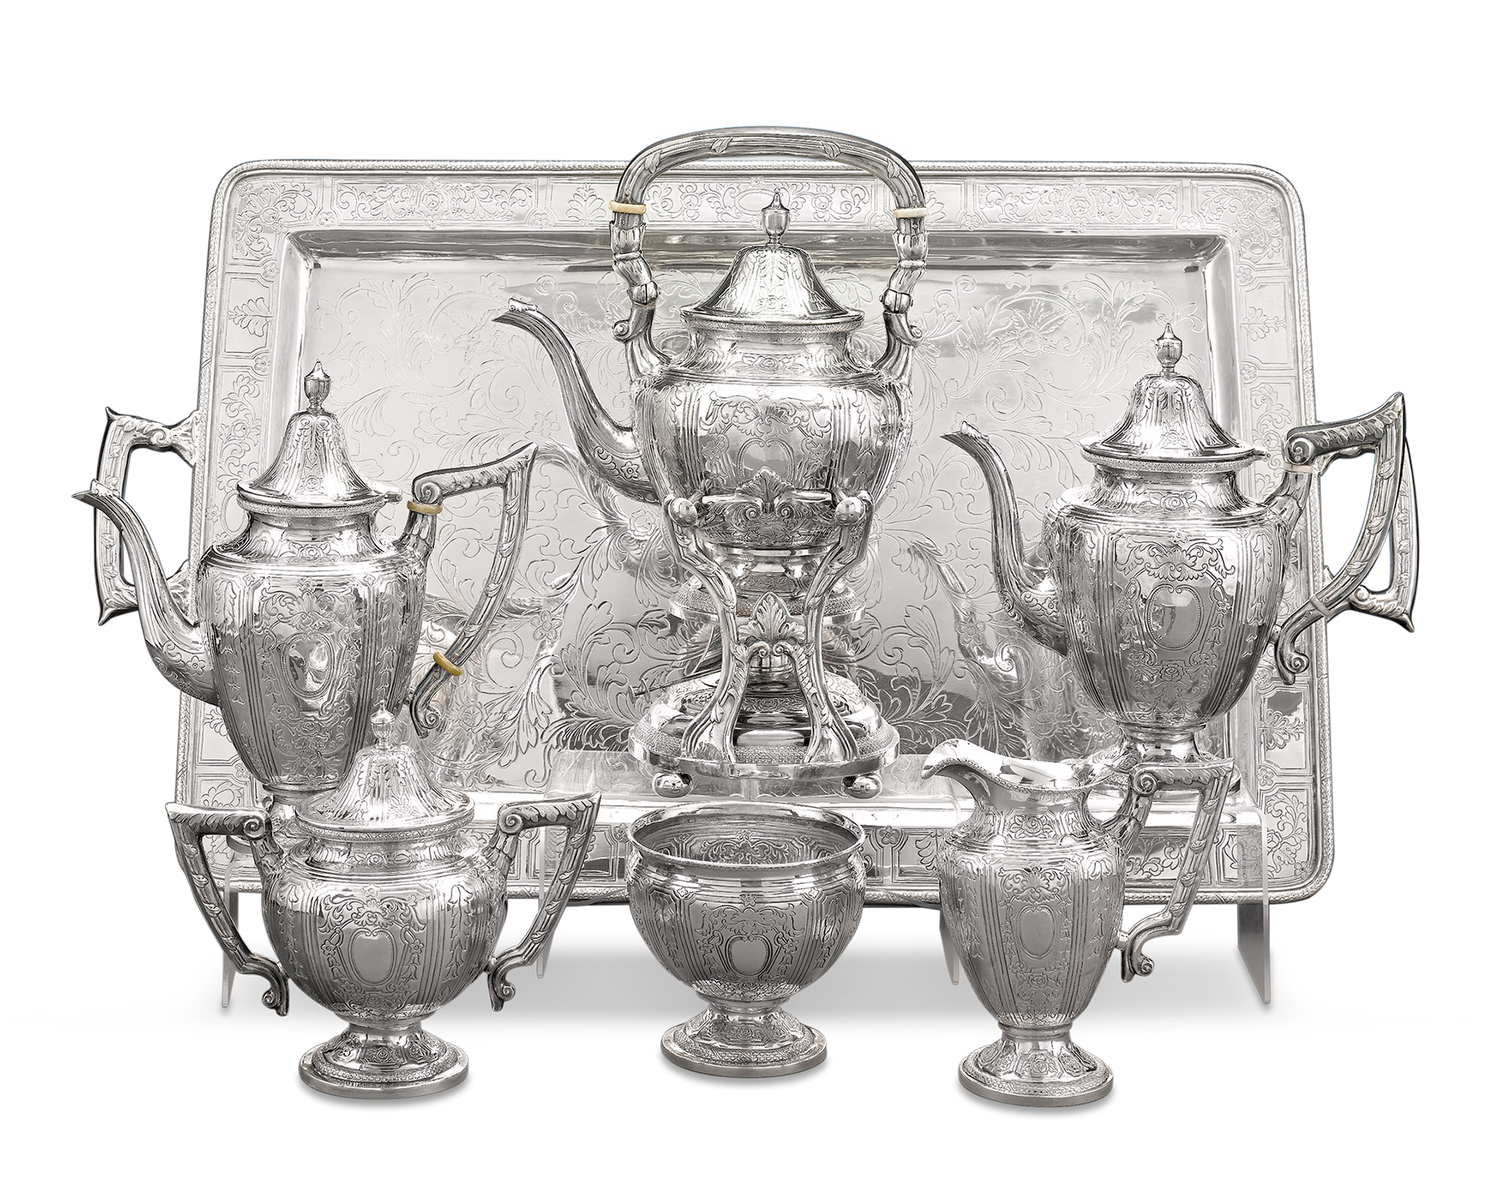 Chinese Export Silver Tea and Coffee Service